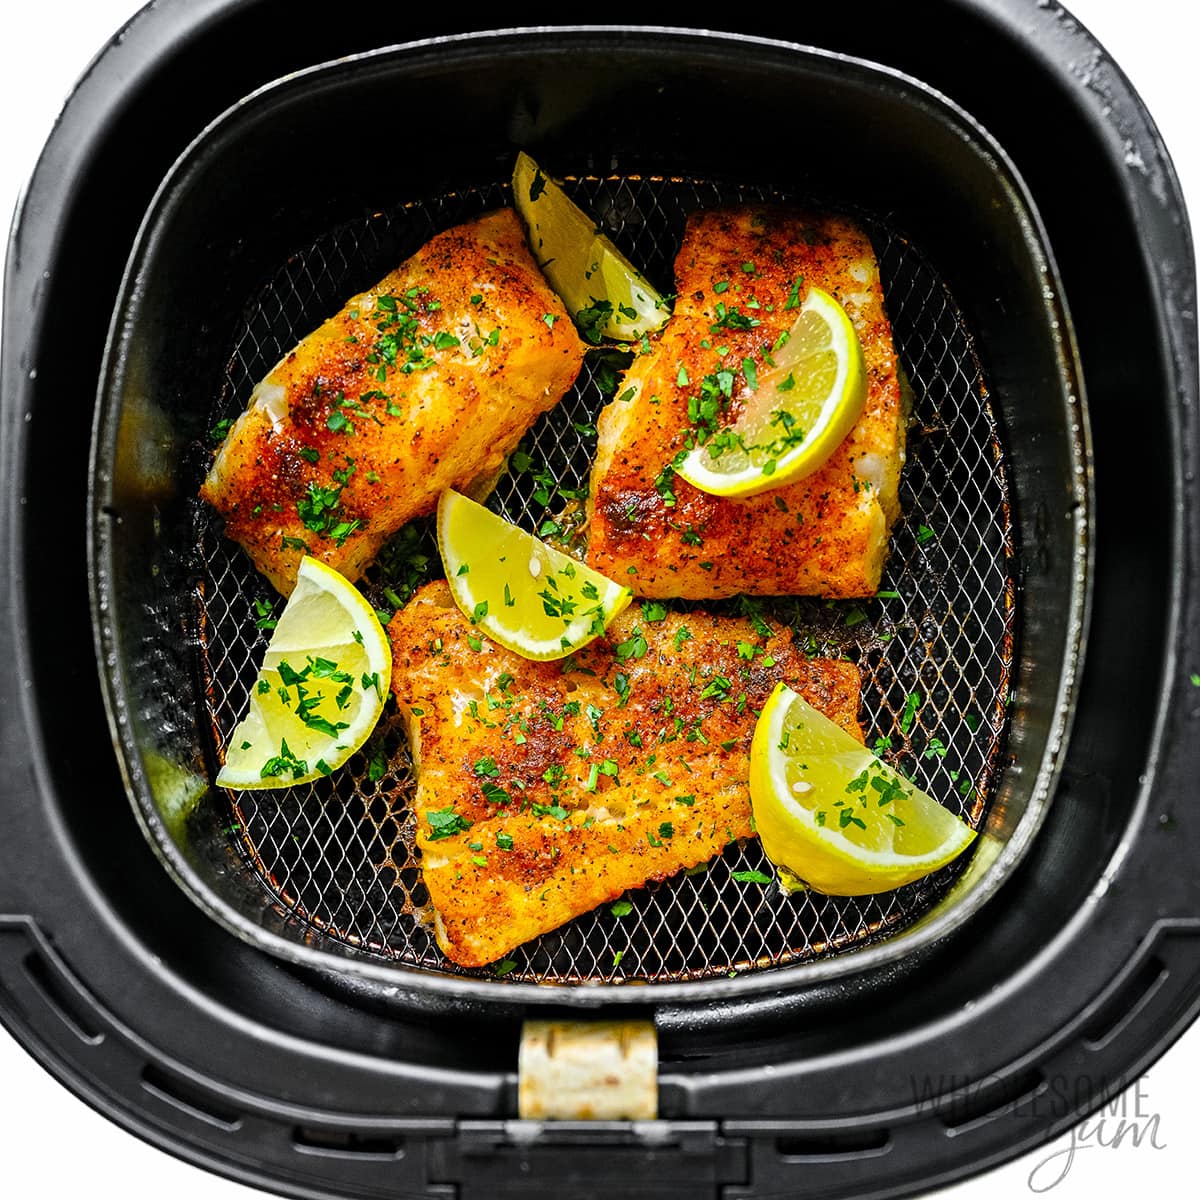 Cooked cod in the air fryer basket with lemon wedges.